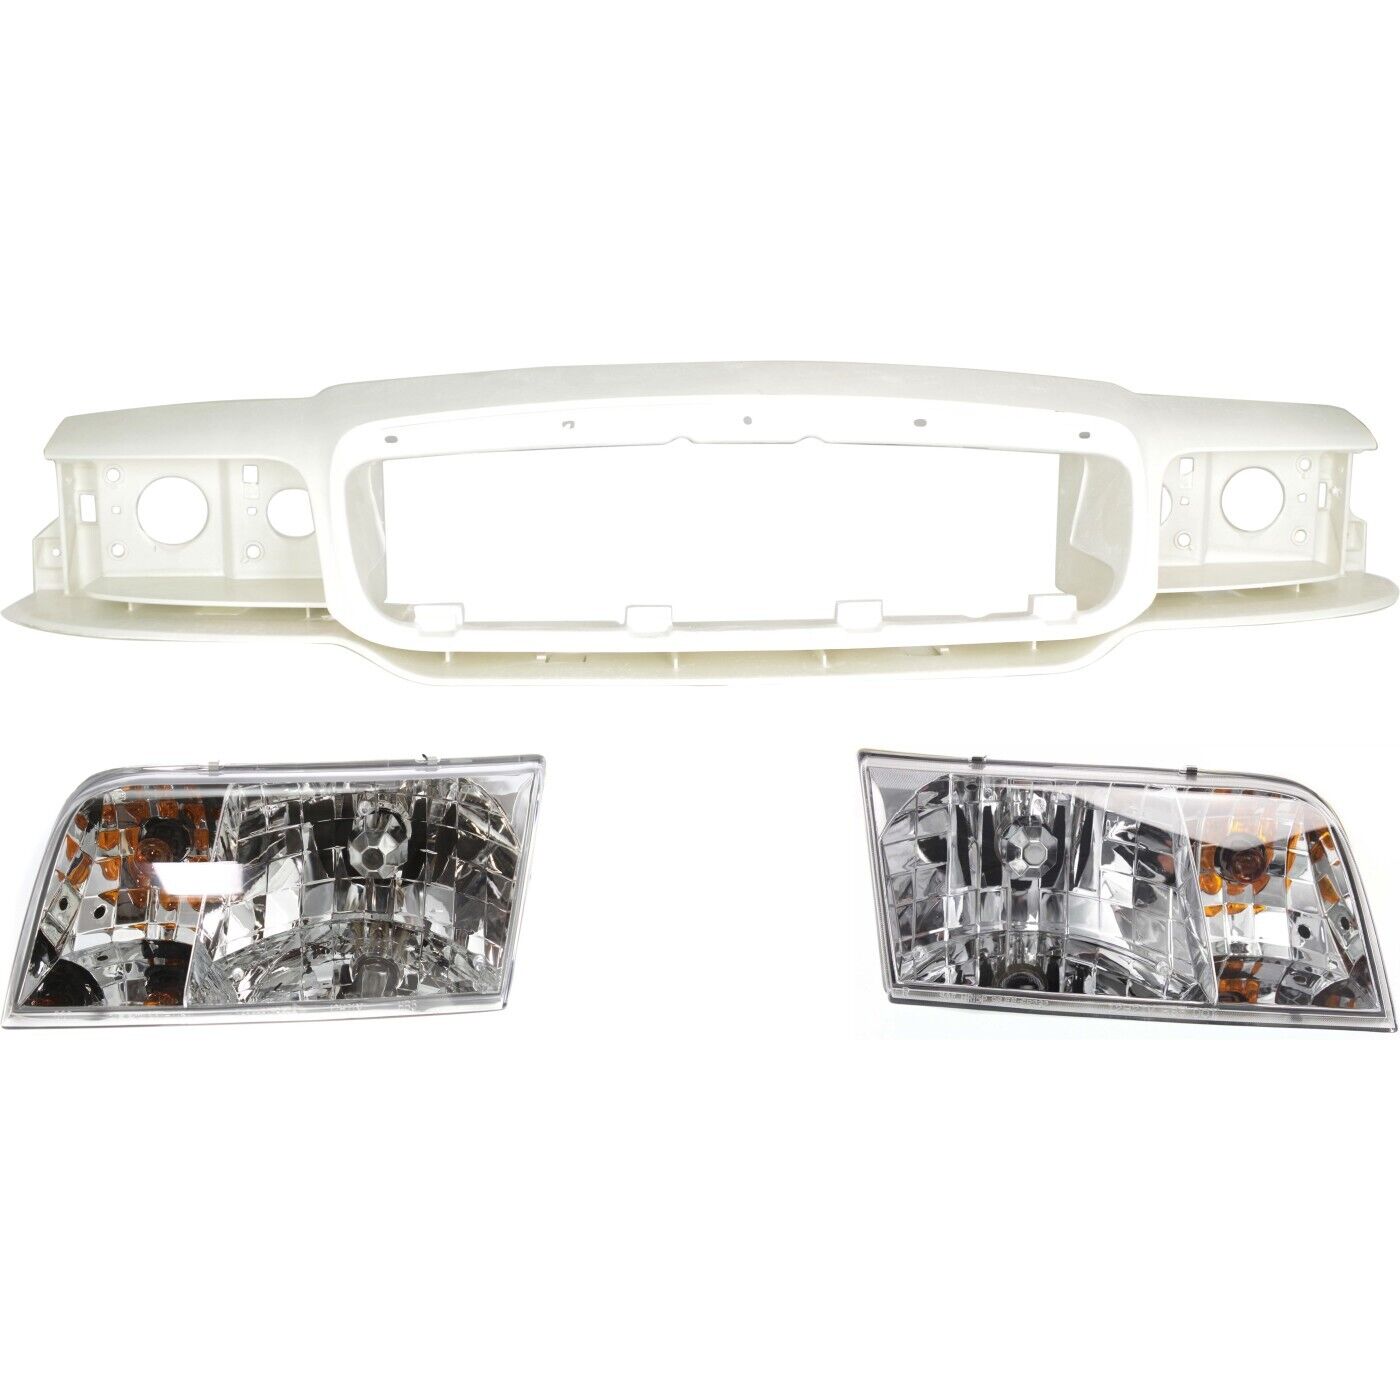 Header Panel Nose Headlight lamp Mounting Sedan for Ford Crown Victoria 98-2011